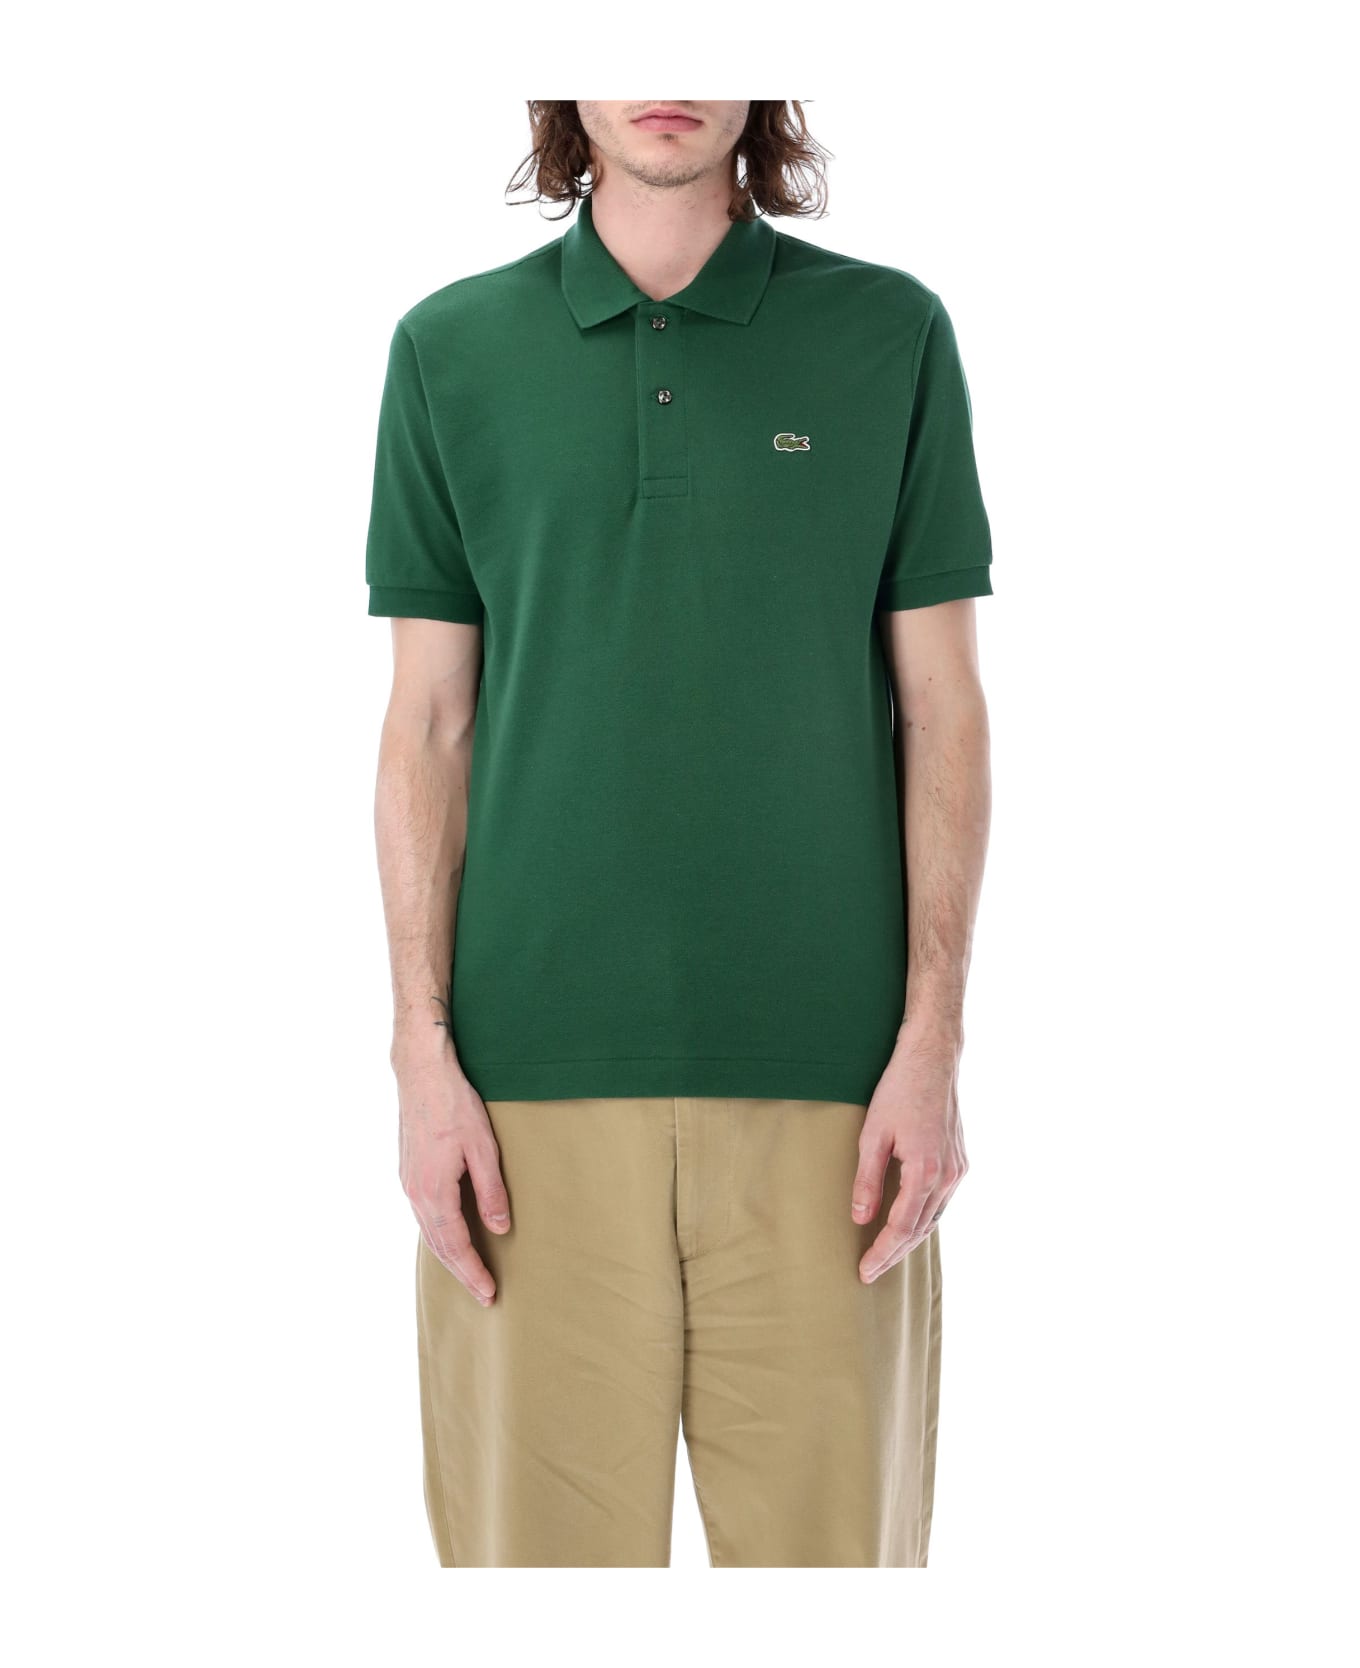 Lacoste Classic Fit Polo Shirt - GREEN